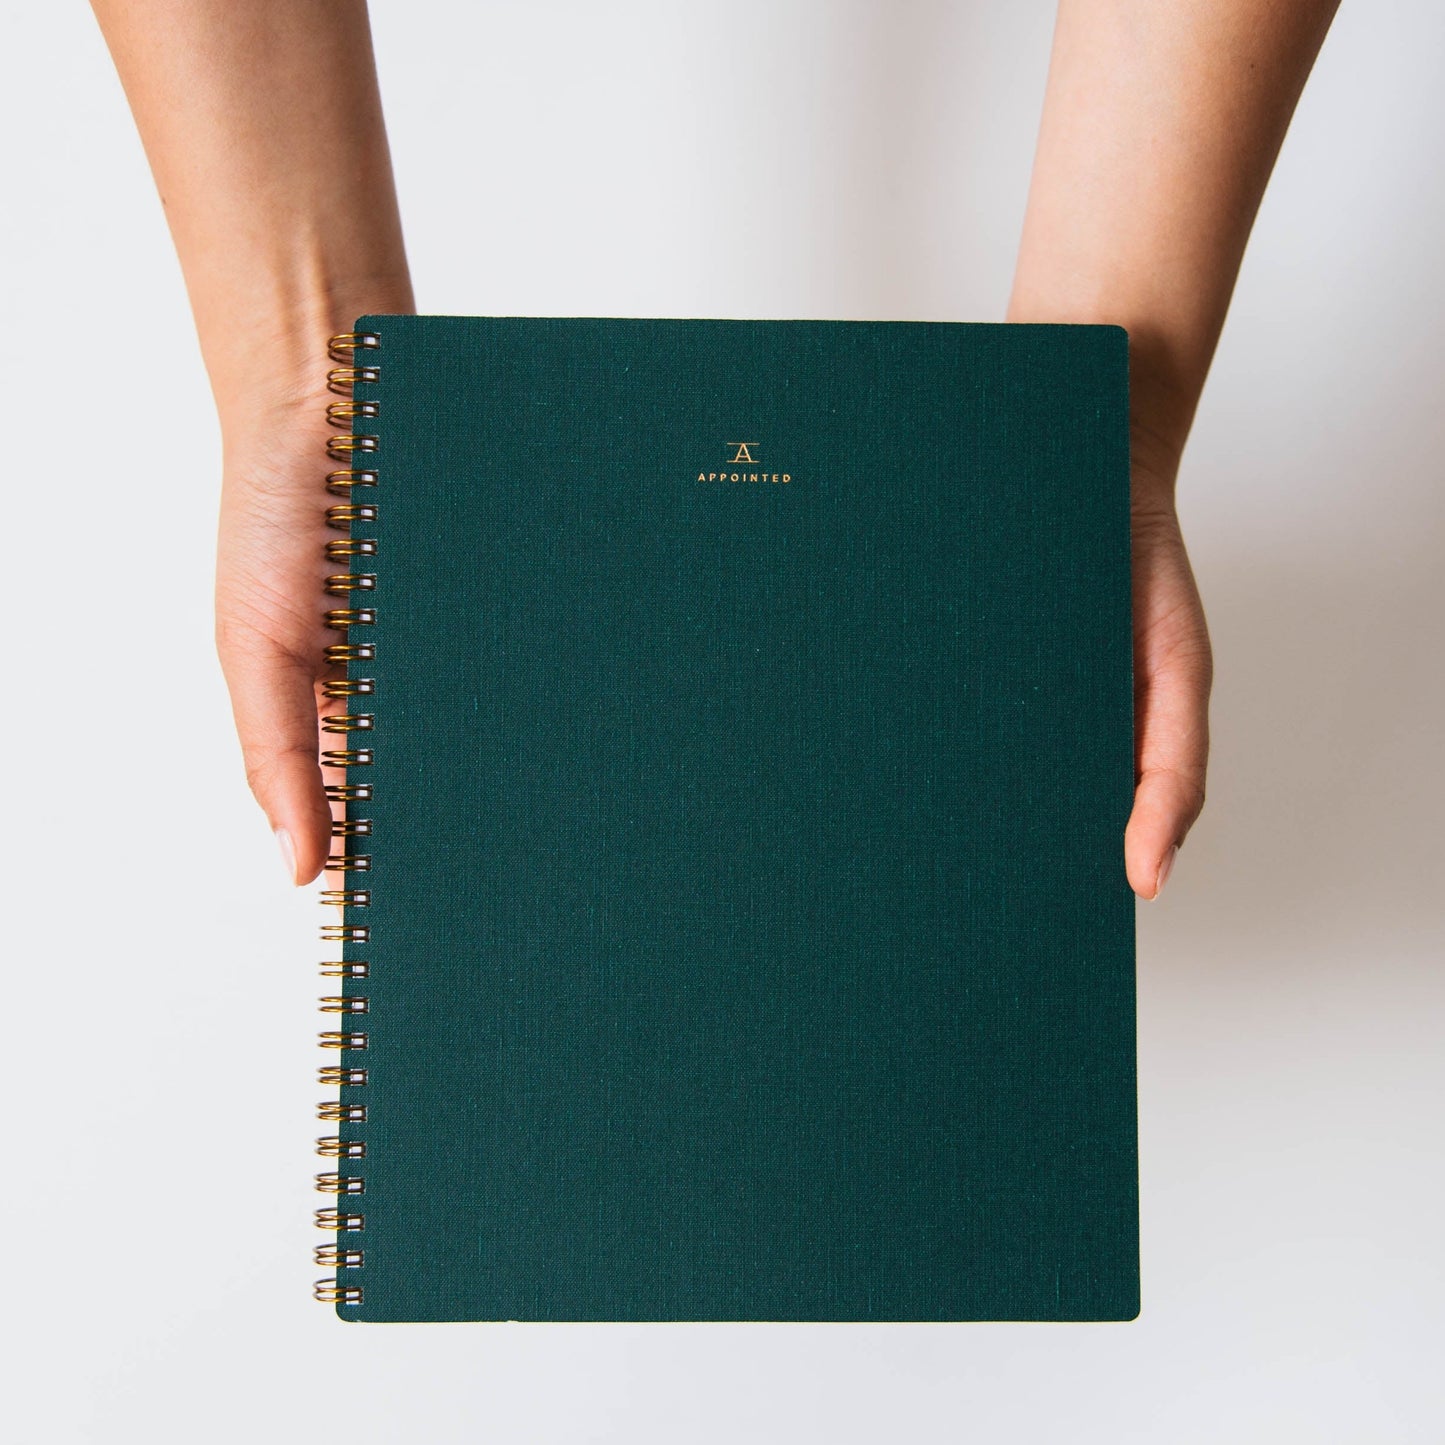 appointed workbook green